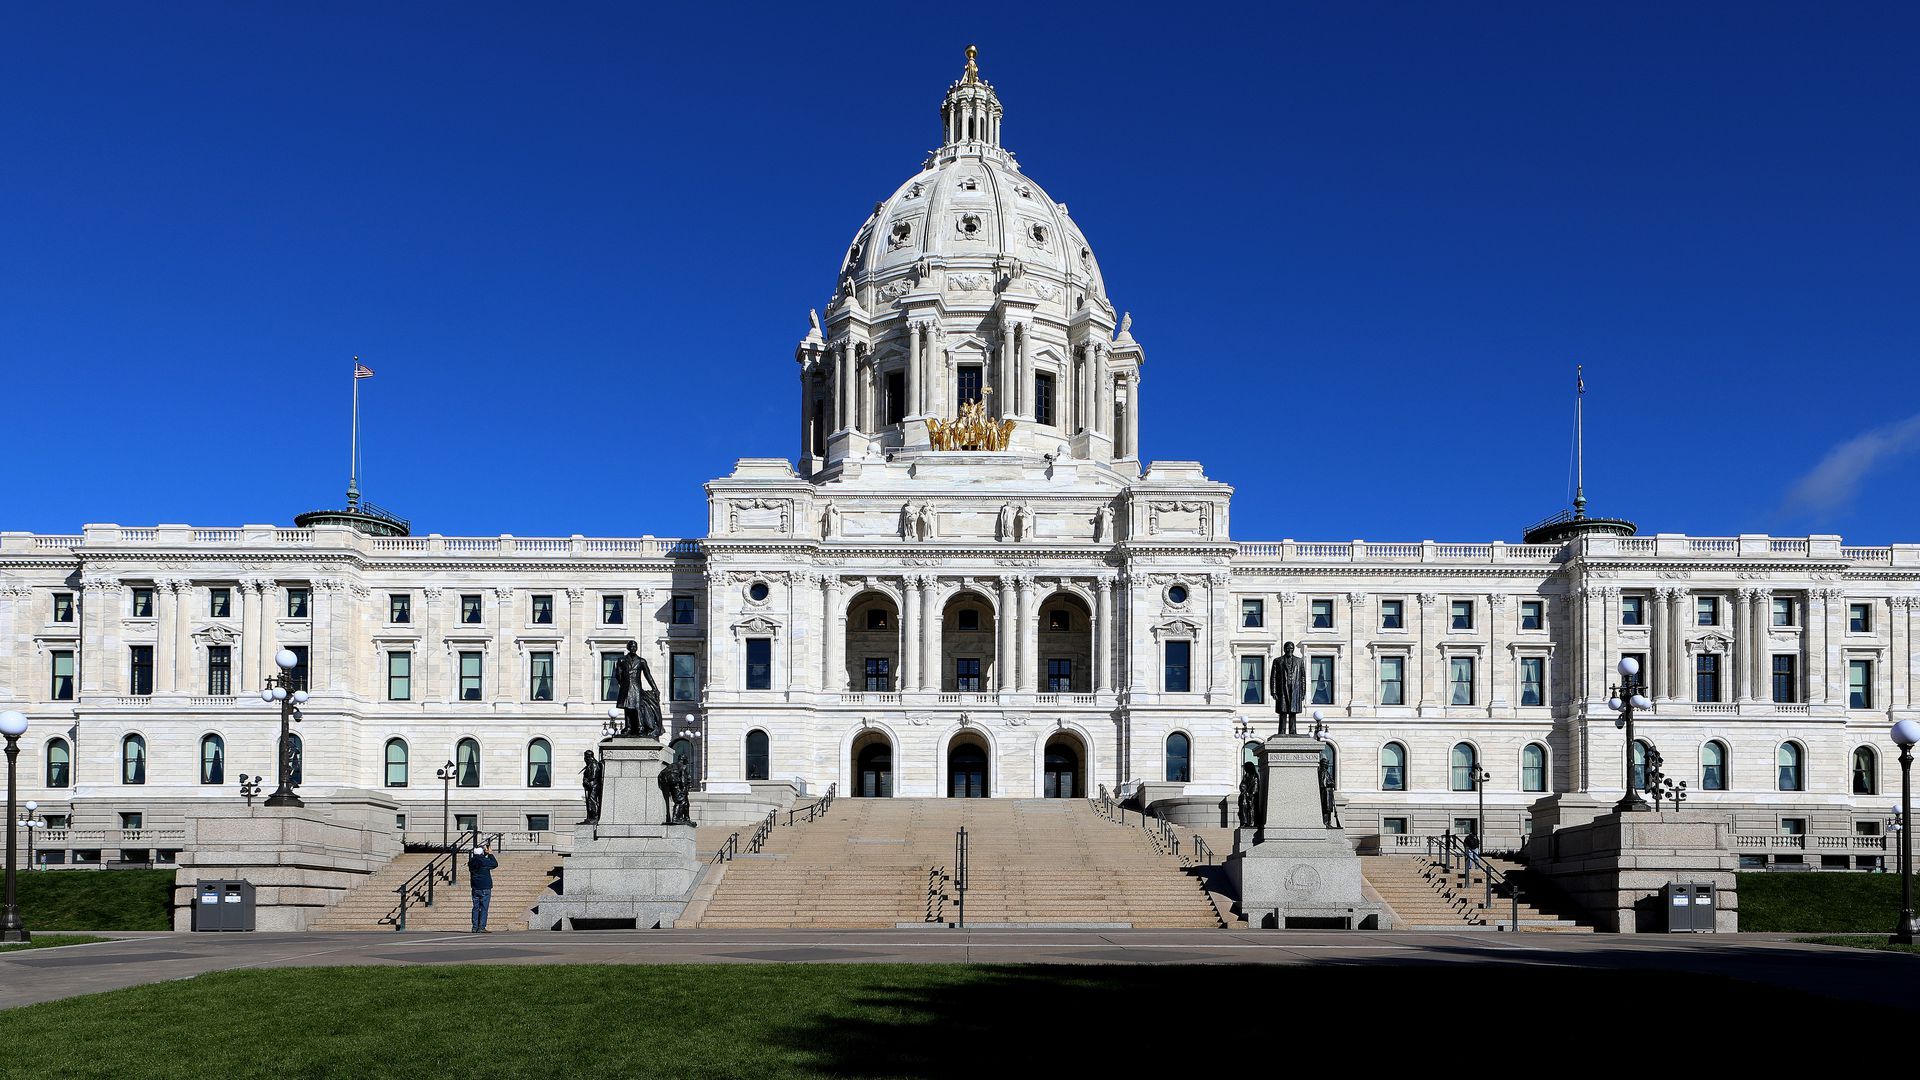 The exterior of the Minnesota State Capitol building.